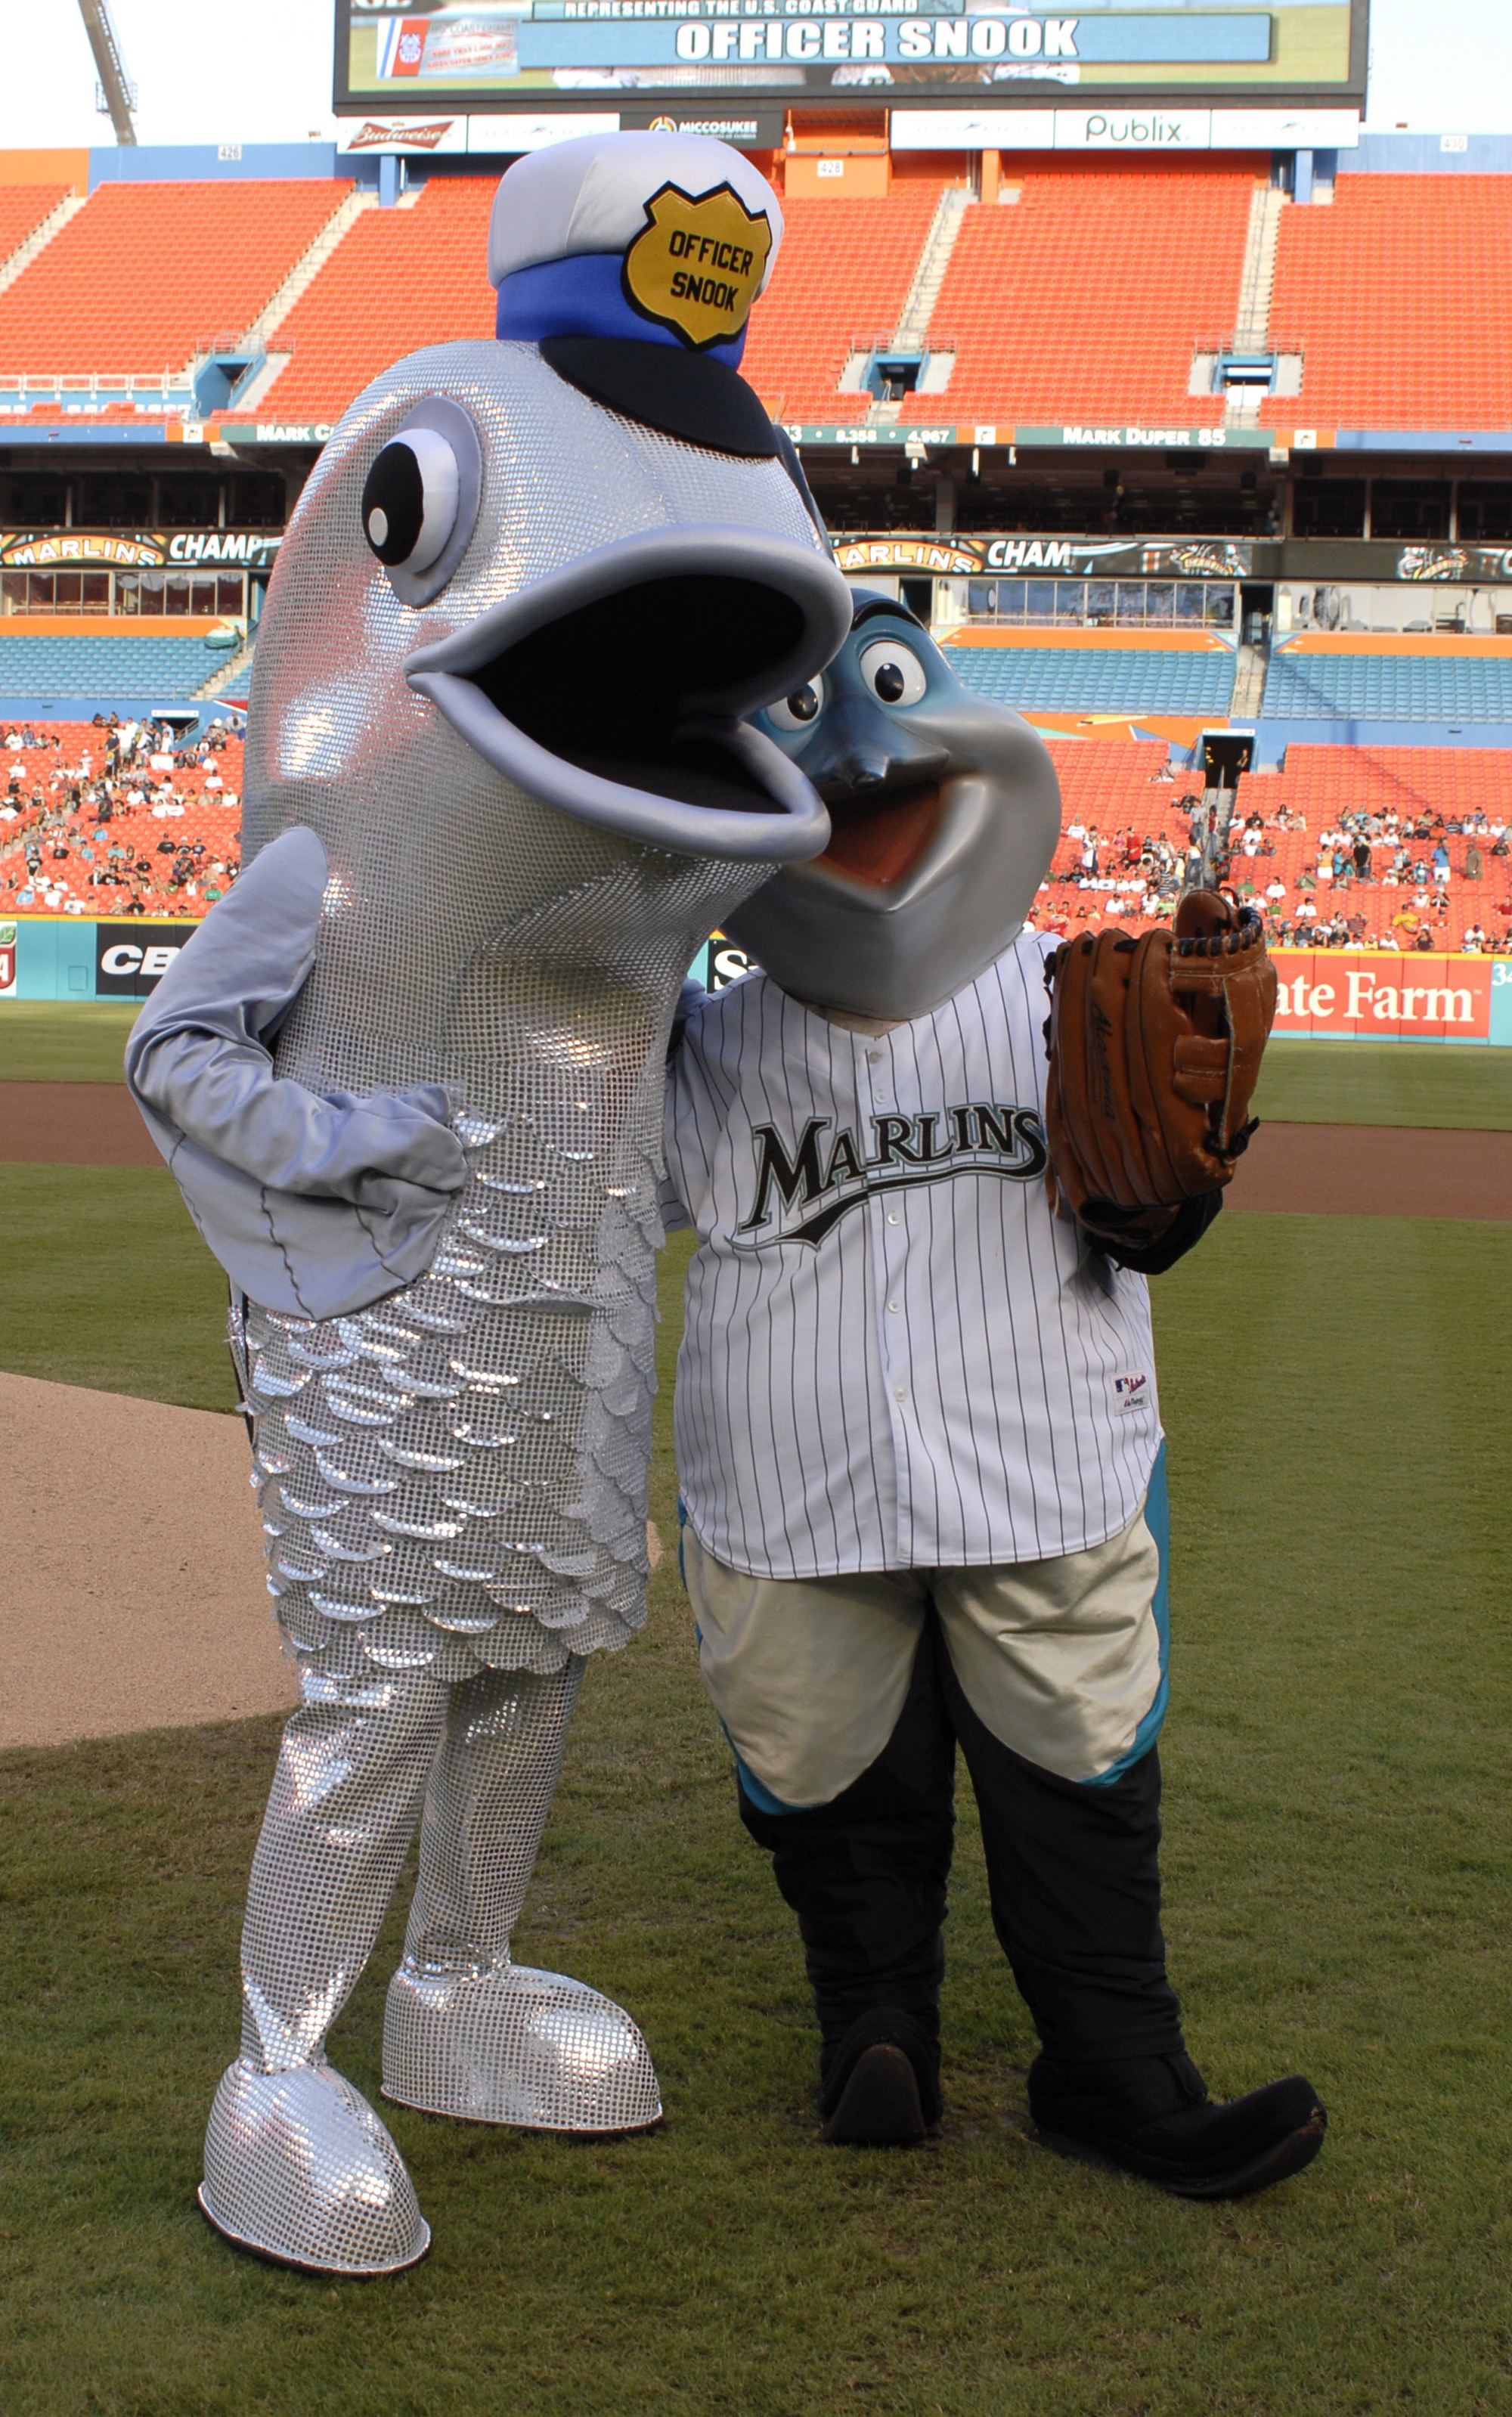 DVIDS - Images - Officer Snook and Billy the Marlin Celebrate Coast Guard  Day